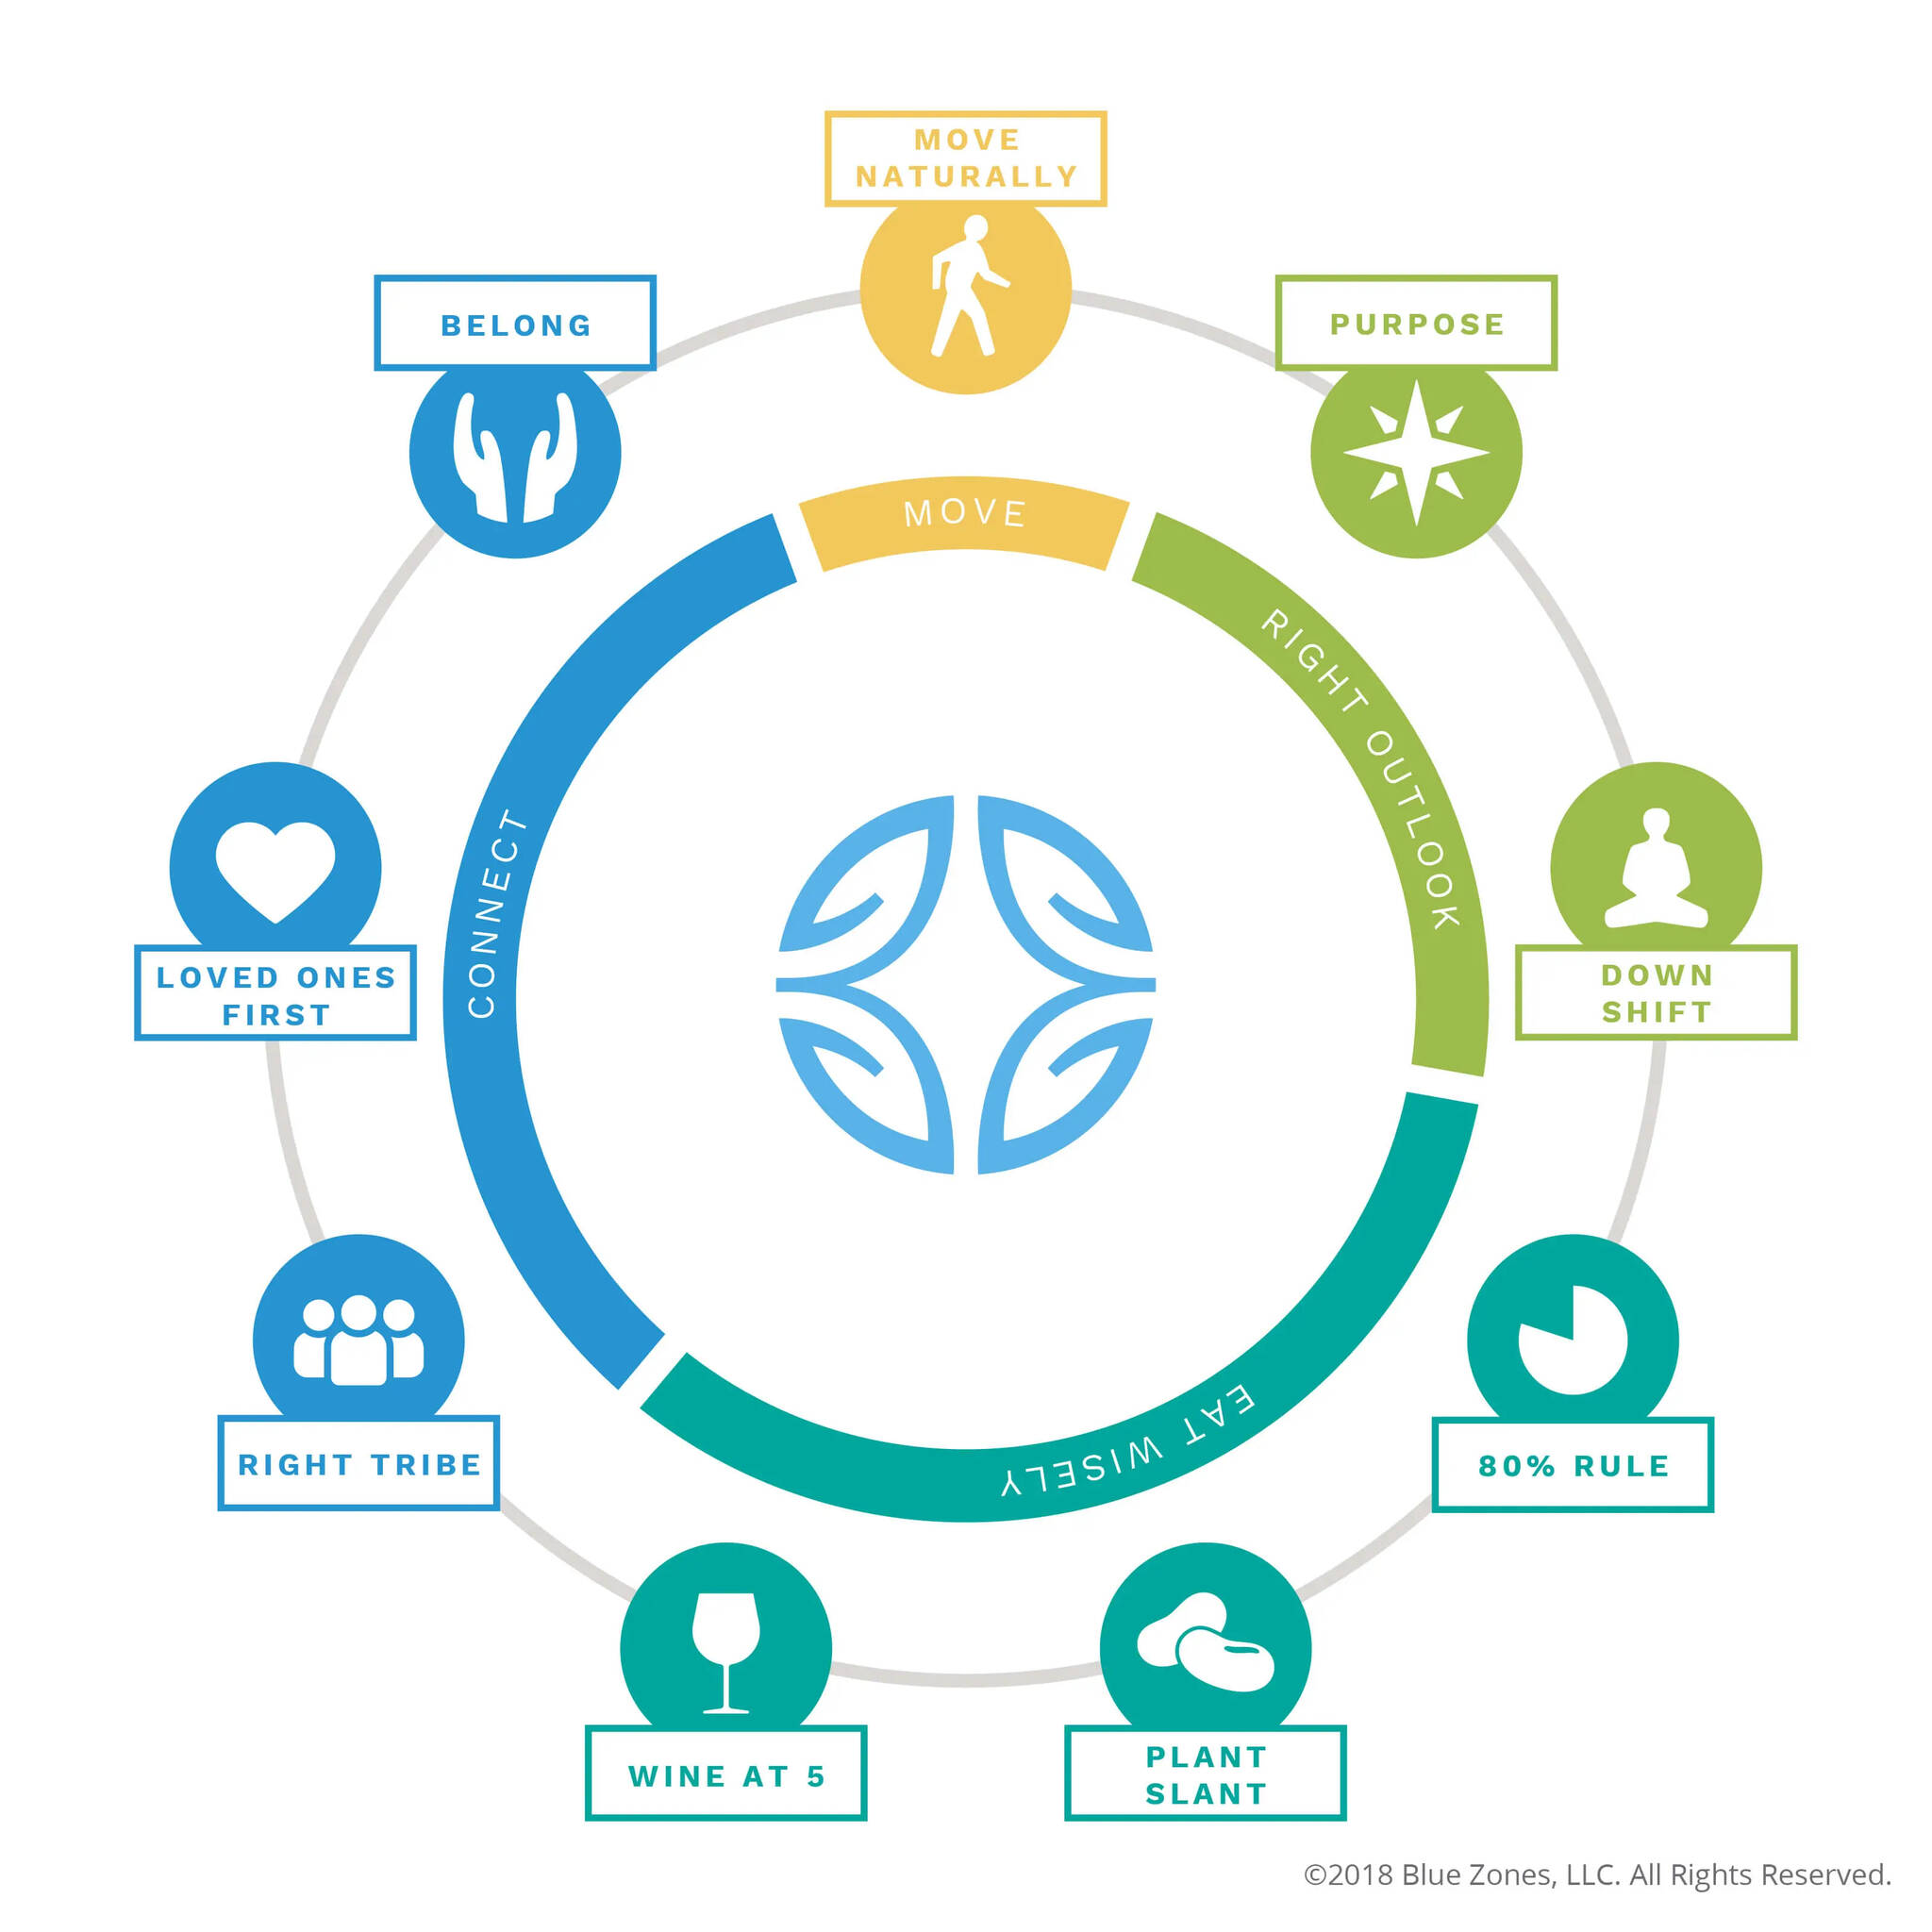 The Blue Zones Power 9 — nine common lifestyle attributes of the world's healthiest communities, as identified by Blue Zones. (Courtesy of Blue Zones, LLC)